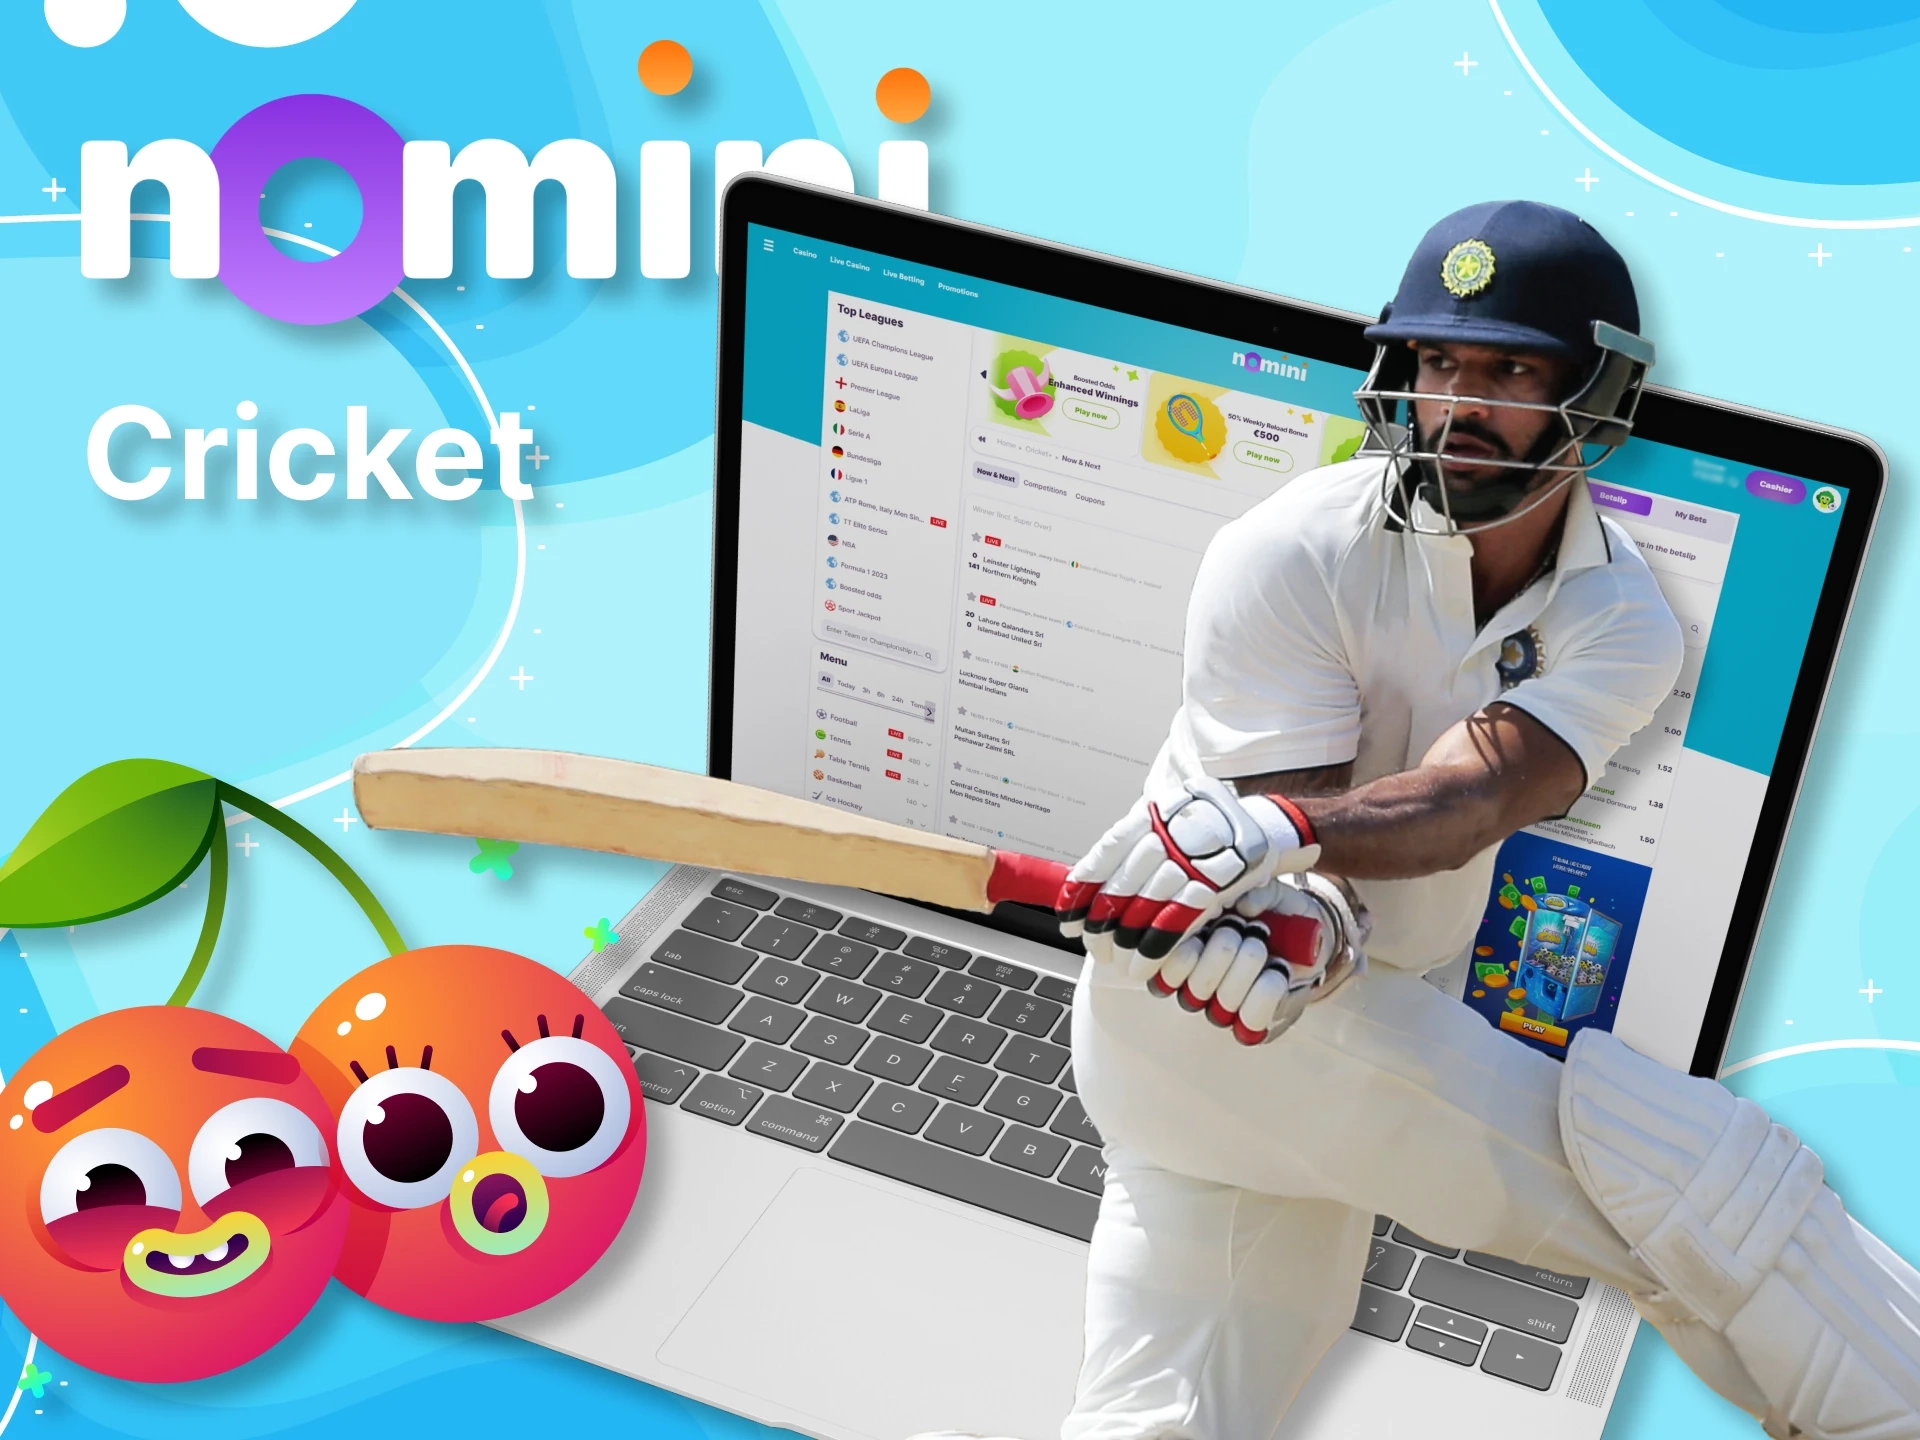 At Nomini, place your cricket bets.